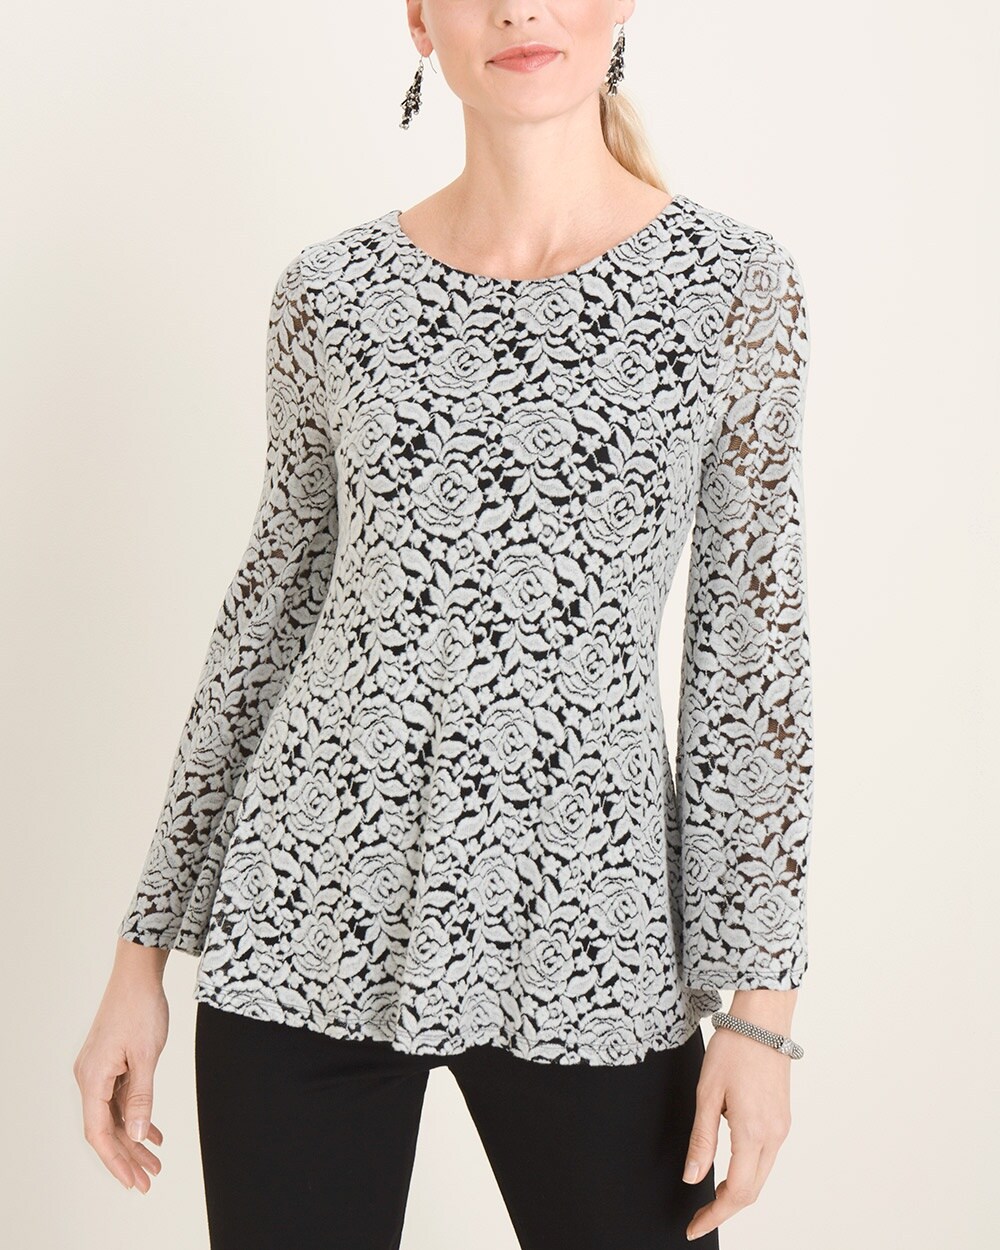 Black and White Floral Jacquard Top